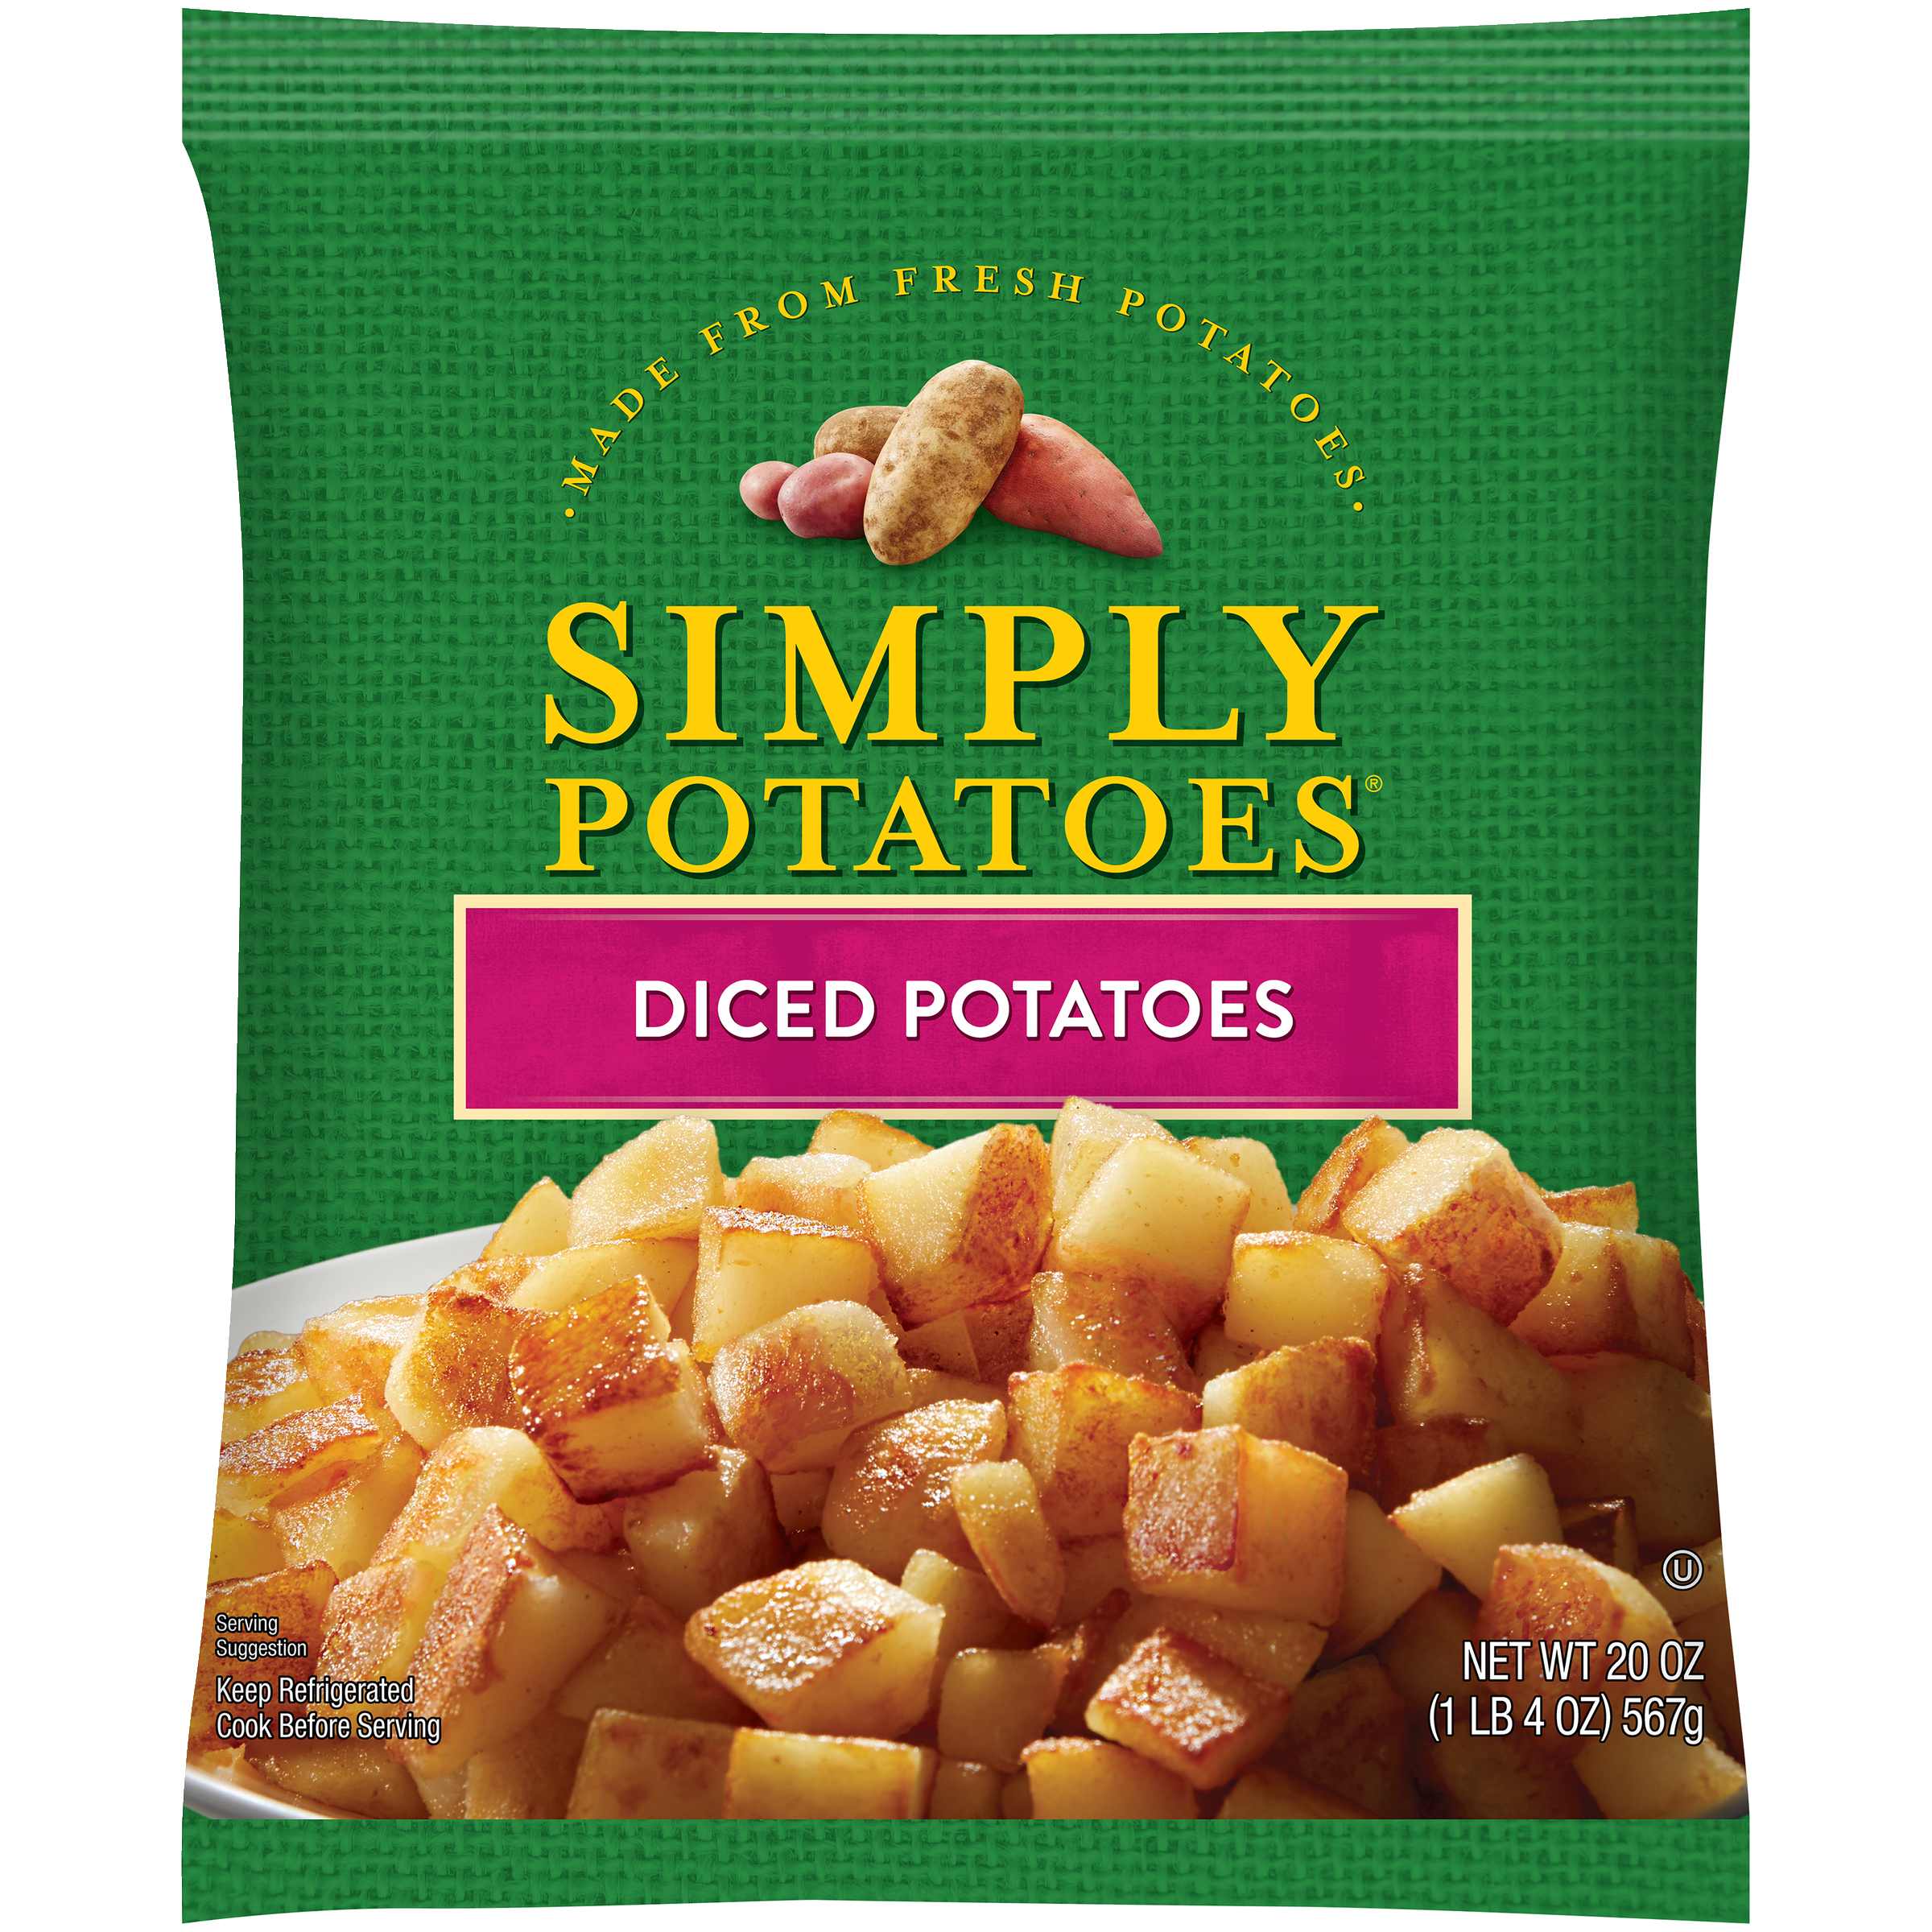 photo of Simply Potatoes Diced Potatoes product